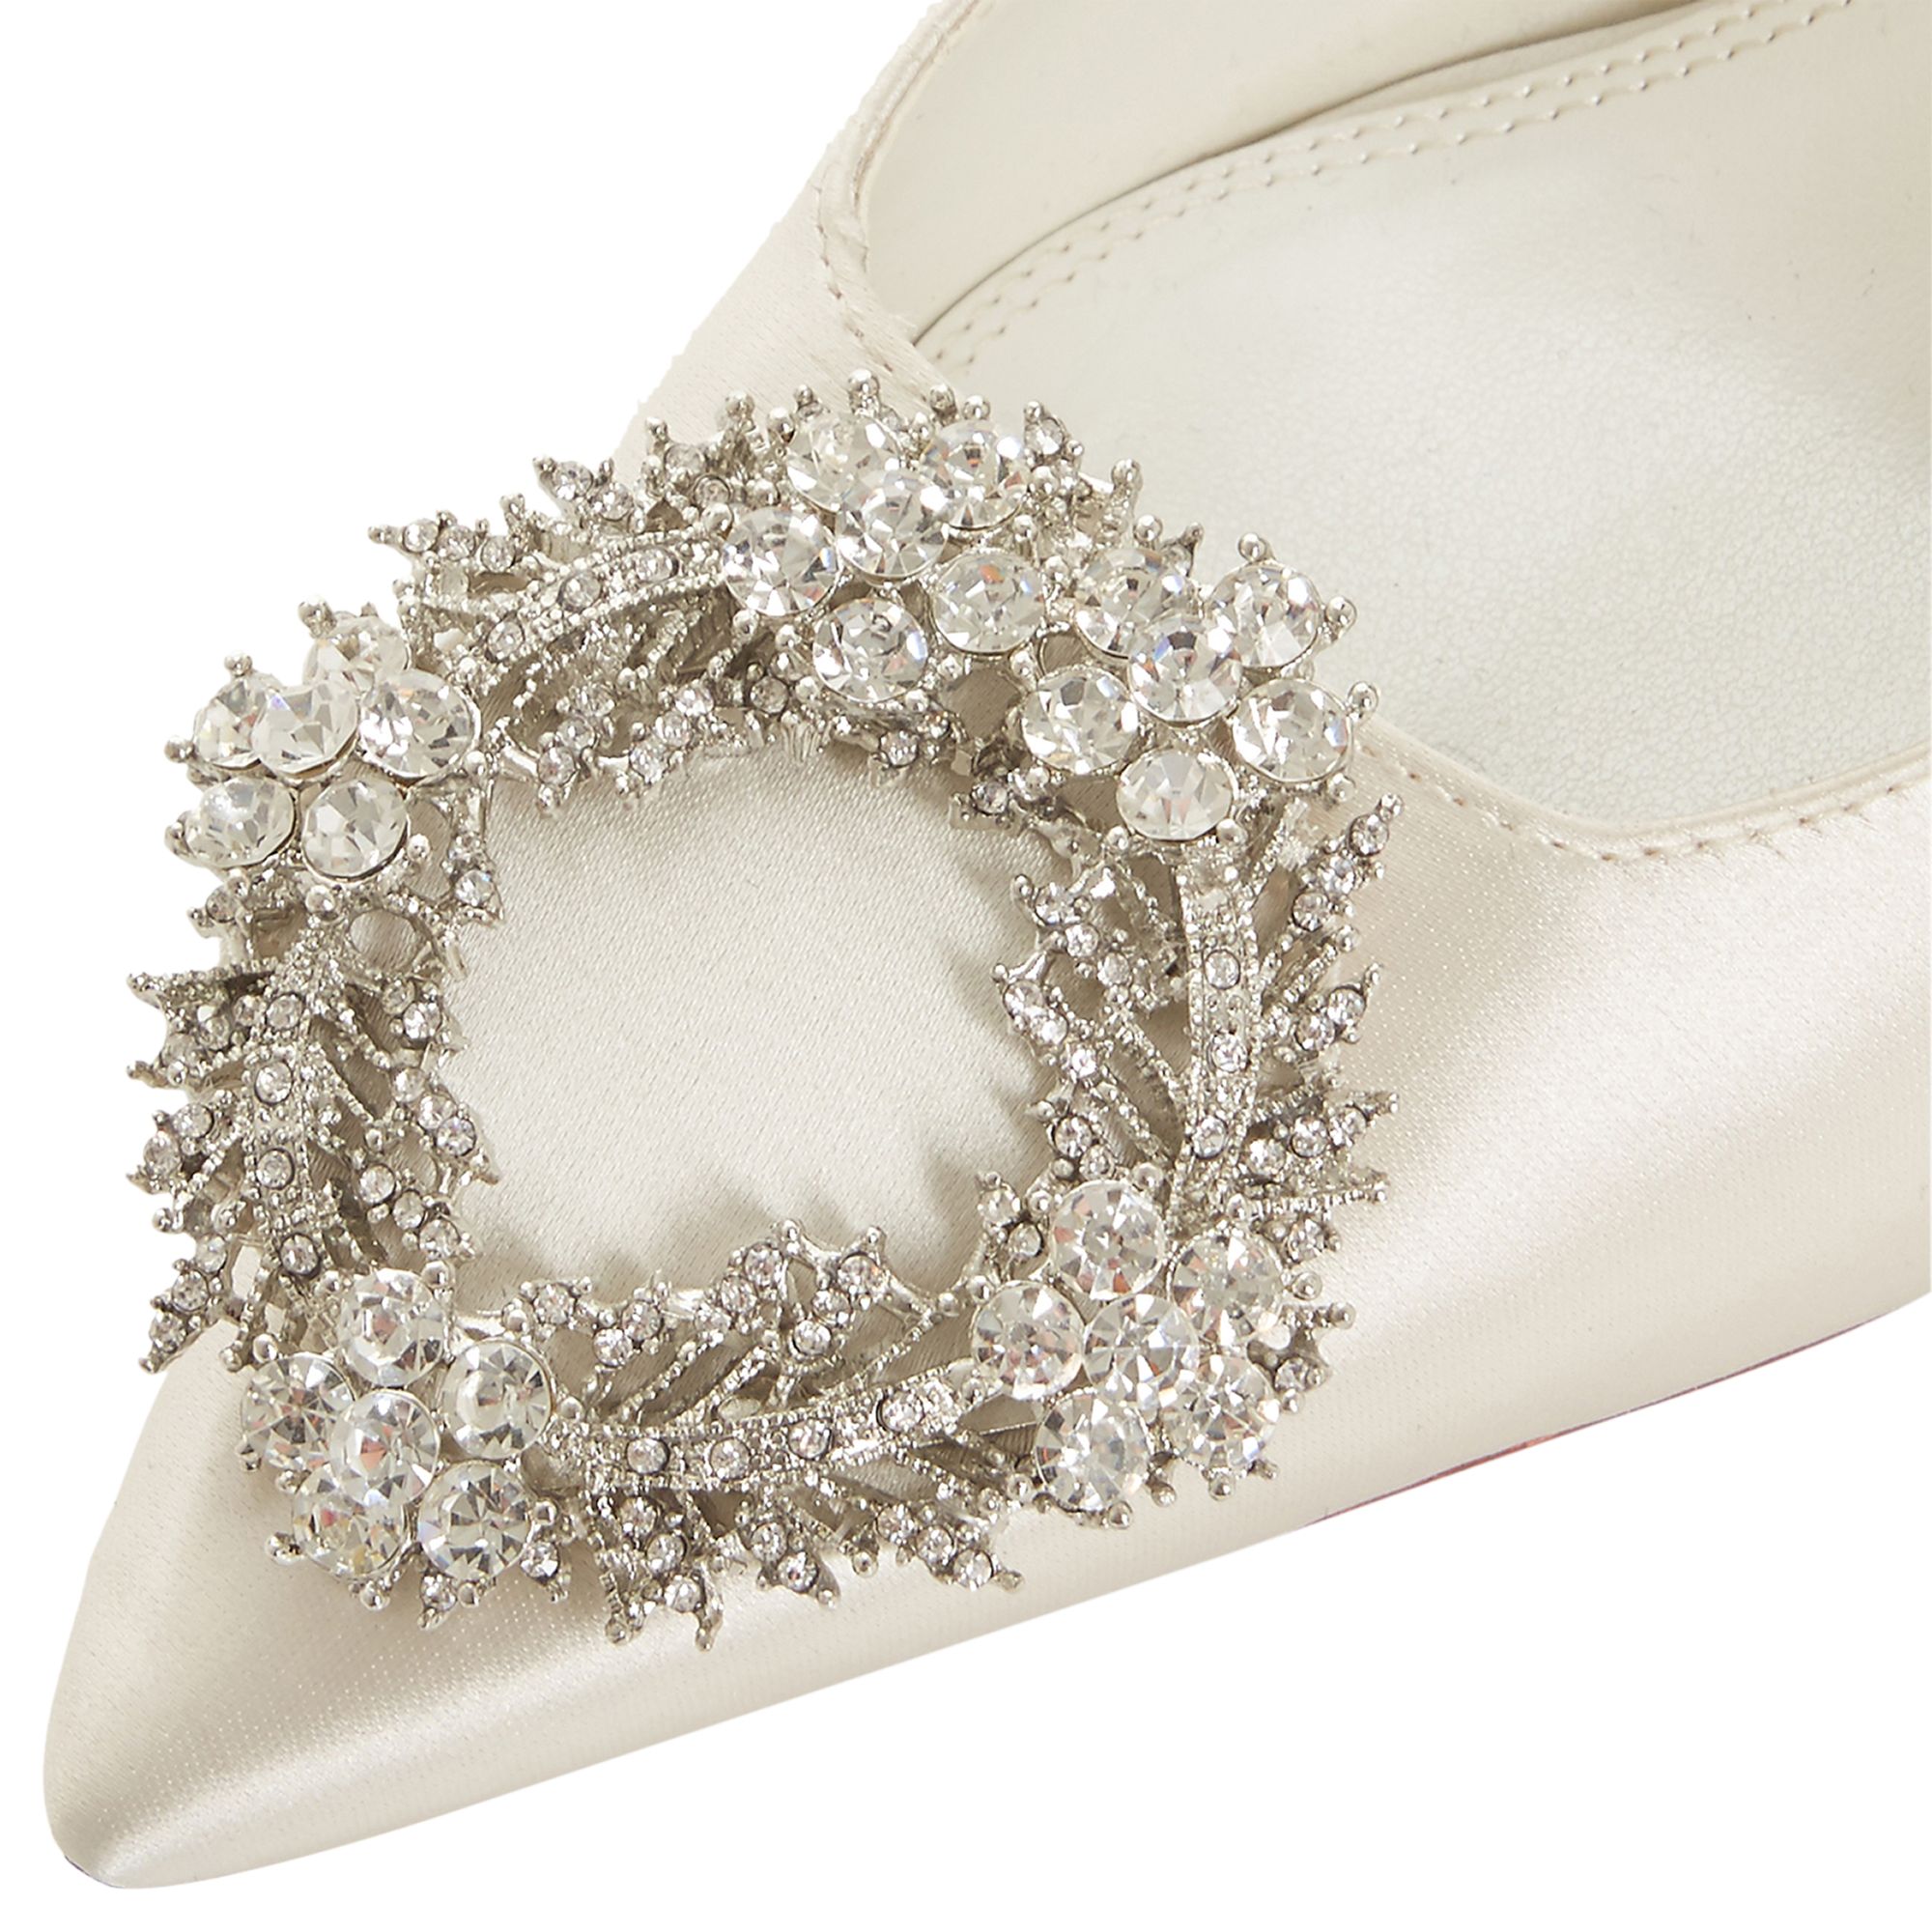 Dune Bridal Collection Blesing Wreath Brooch Court Shoes